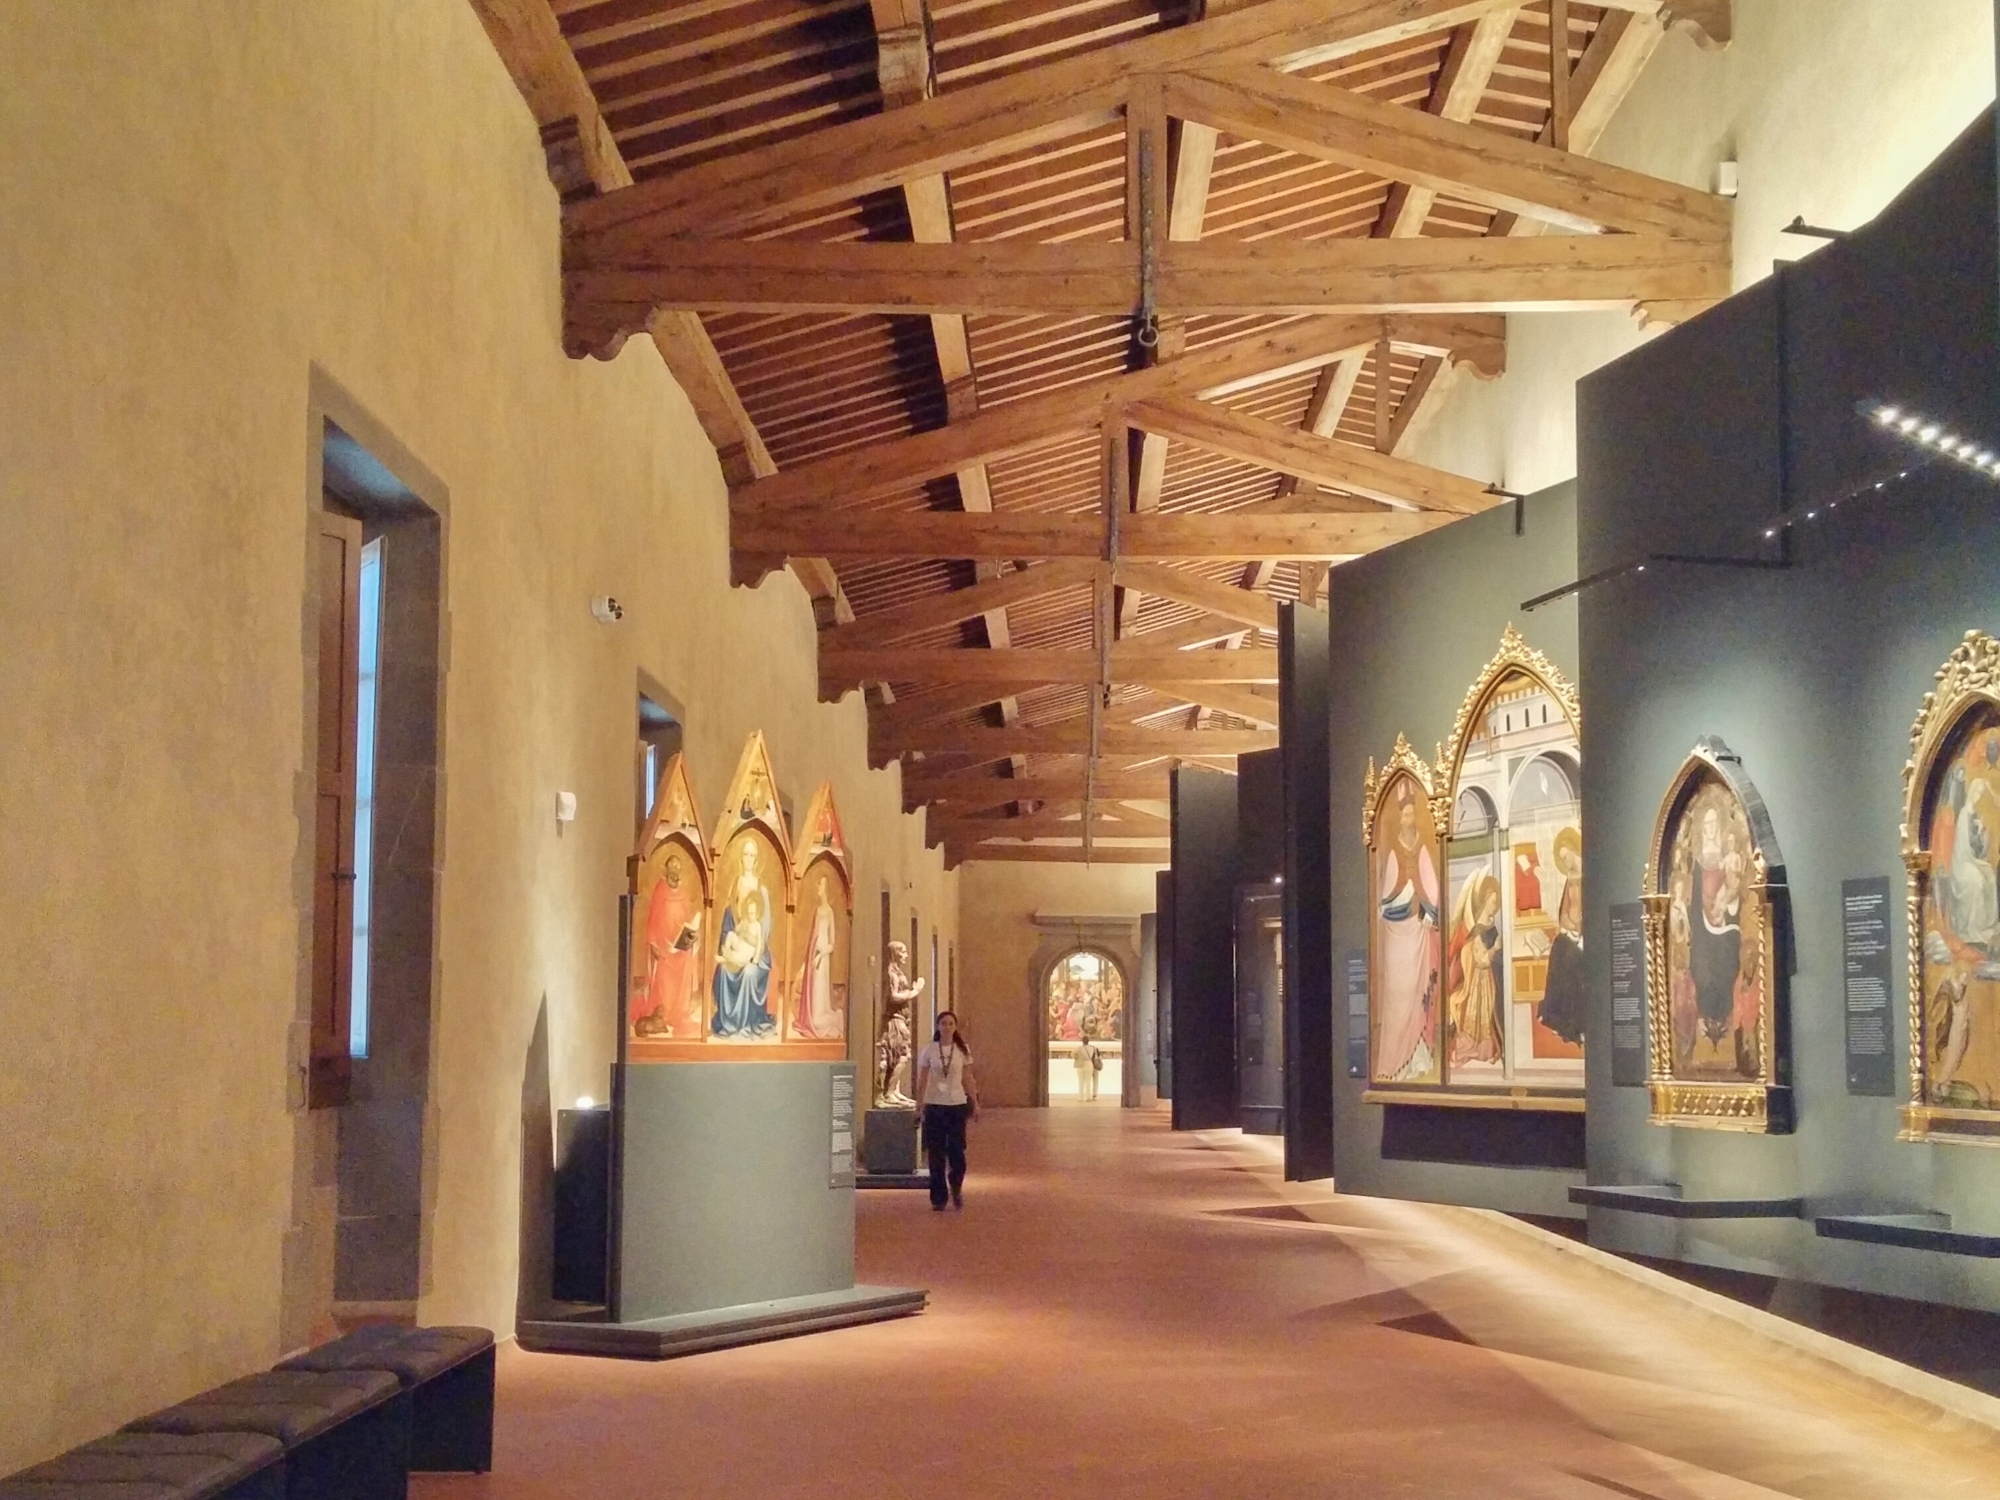 The art section of the Museum